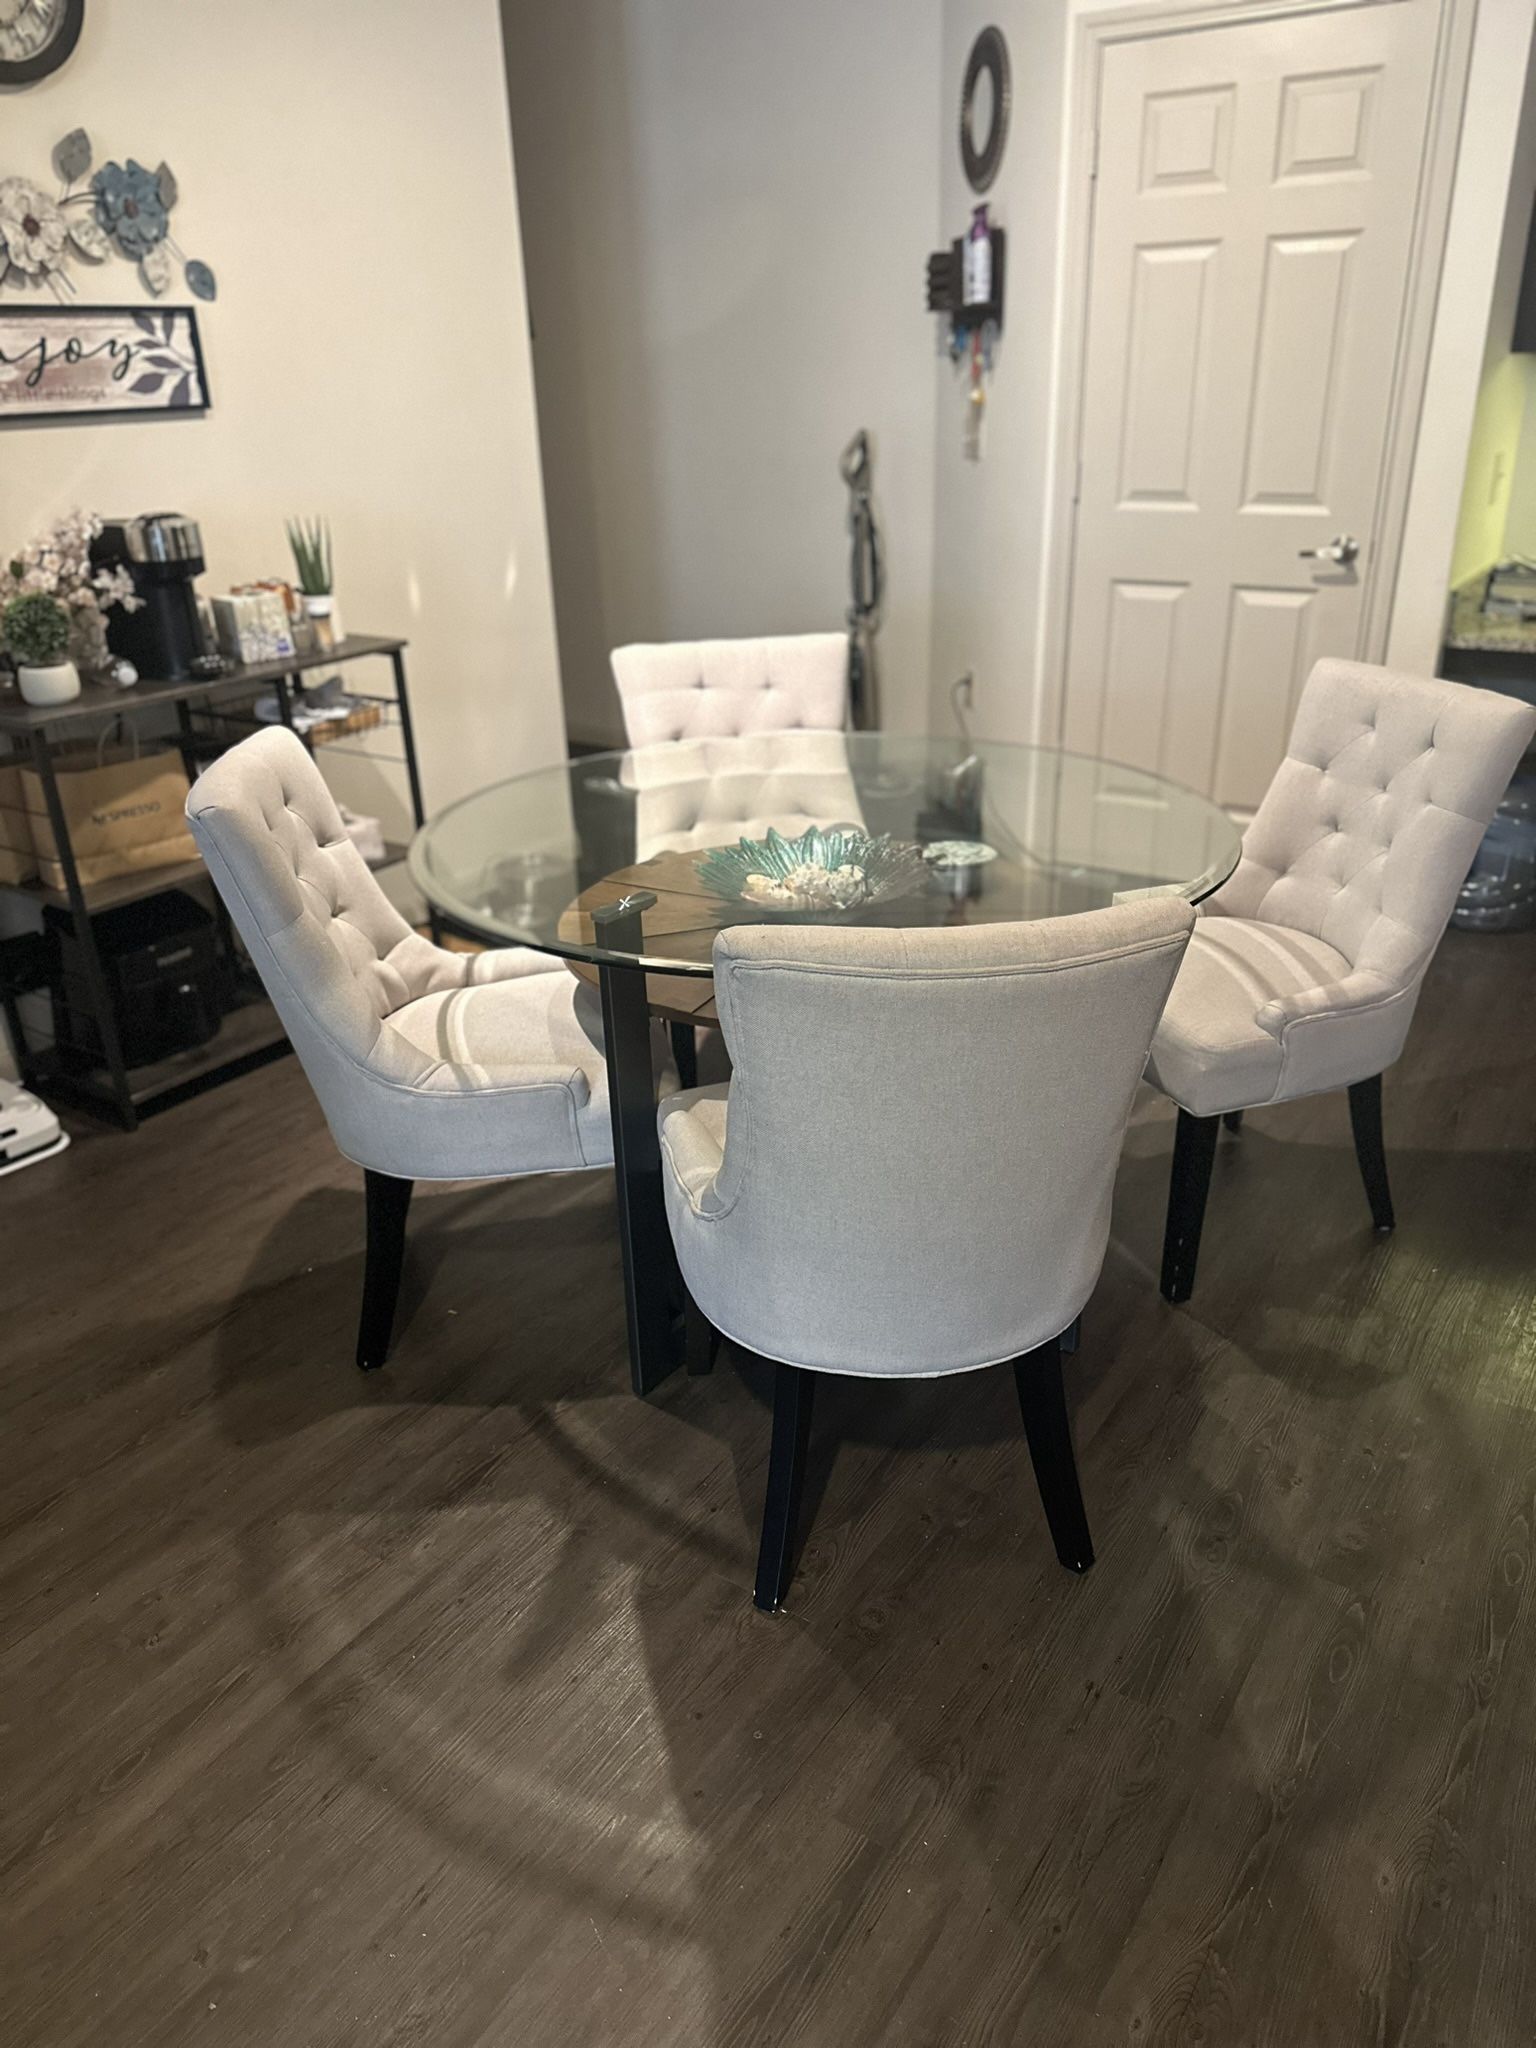 Beautiful Round Table With 4 Chairs